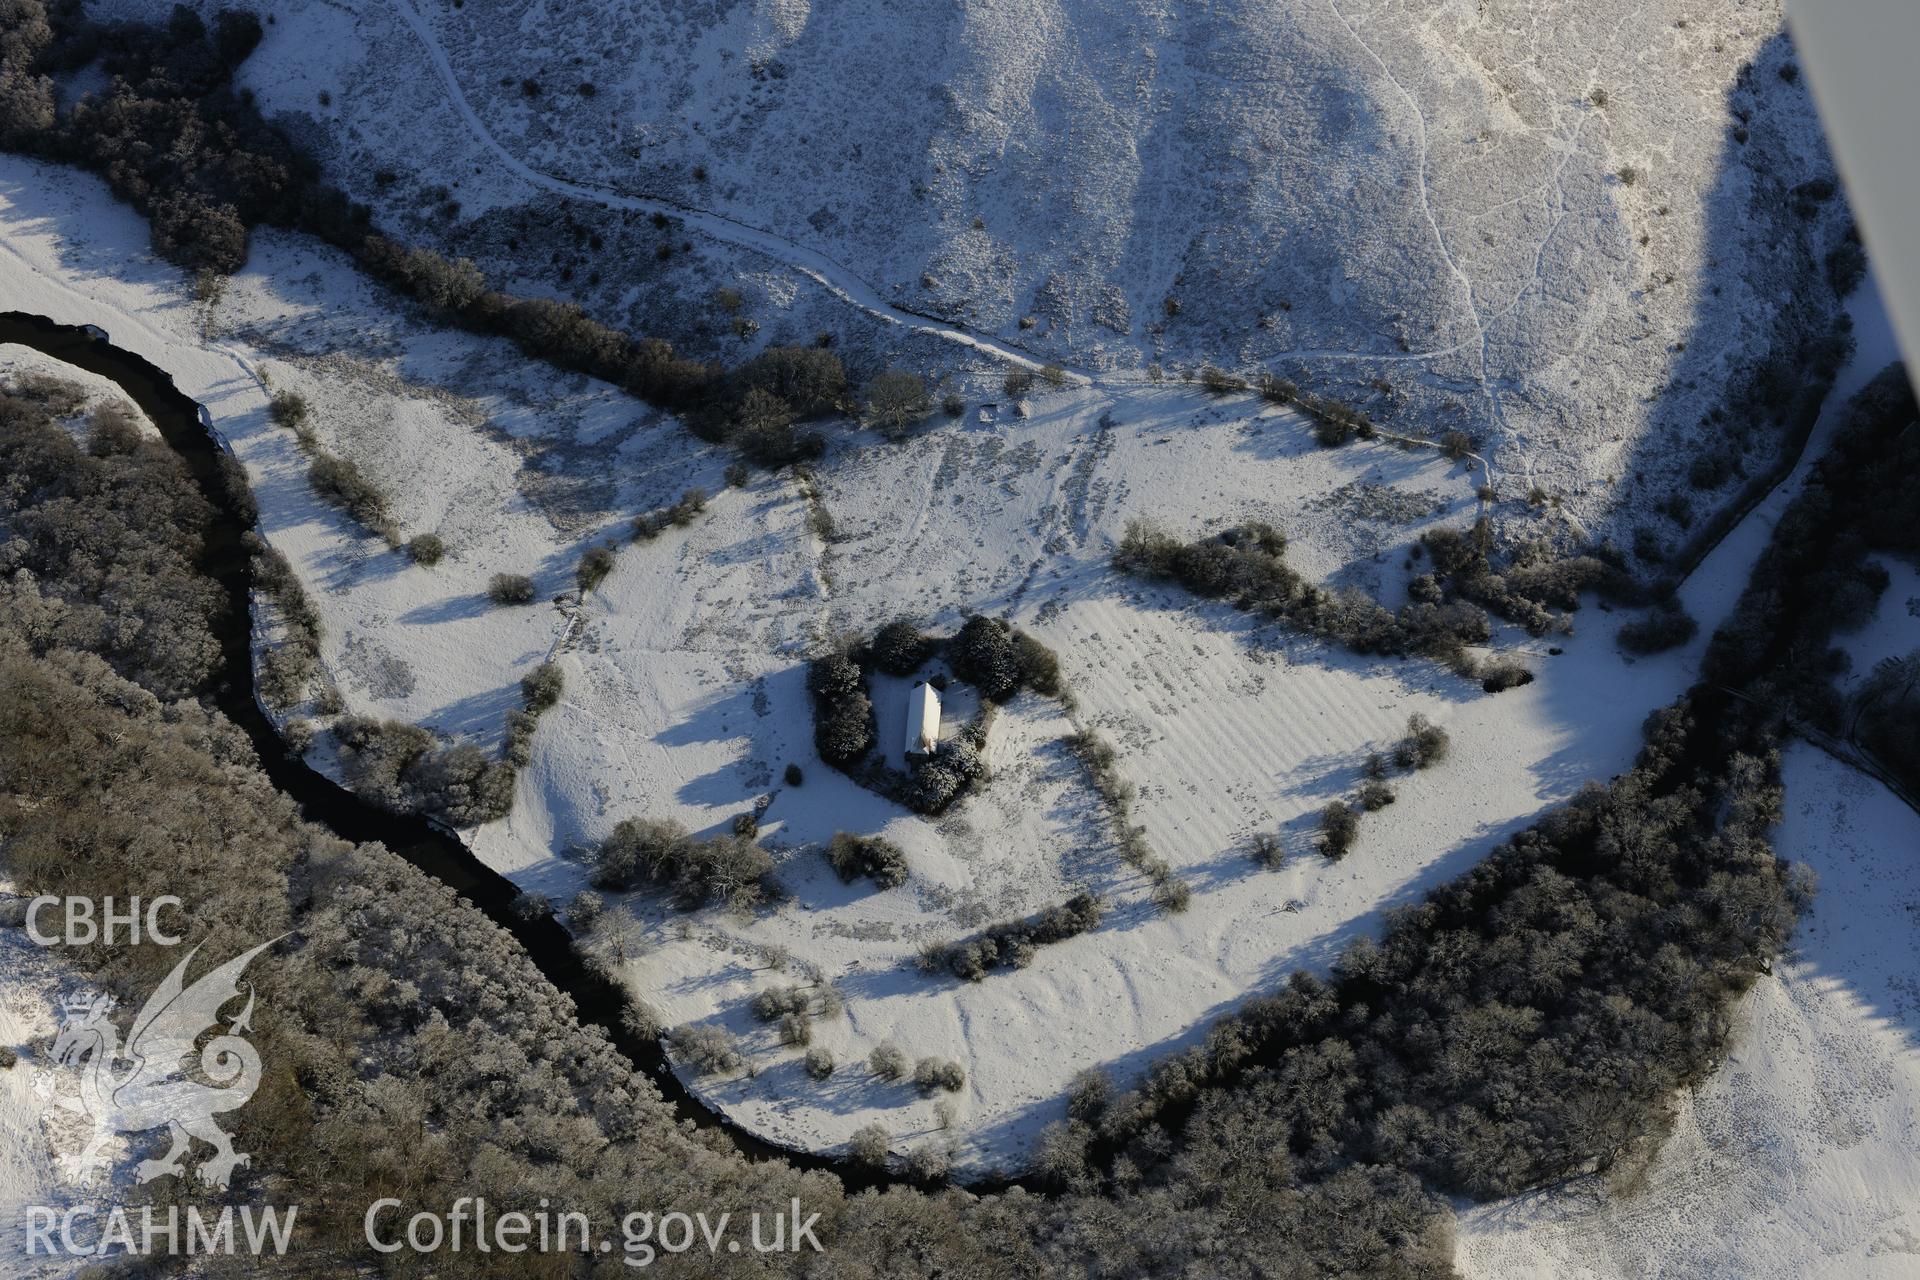 The medieval settlement of Cefnllys, Cefnllys field system and St. Michael's church, on the banks of the river Ithon, east of Llandrindod Wells. Oblique aerial photograph taken during the Royal Commission?s programme of archaeological aerial reconnaissance by Toby Driver on 15th January 2013.